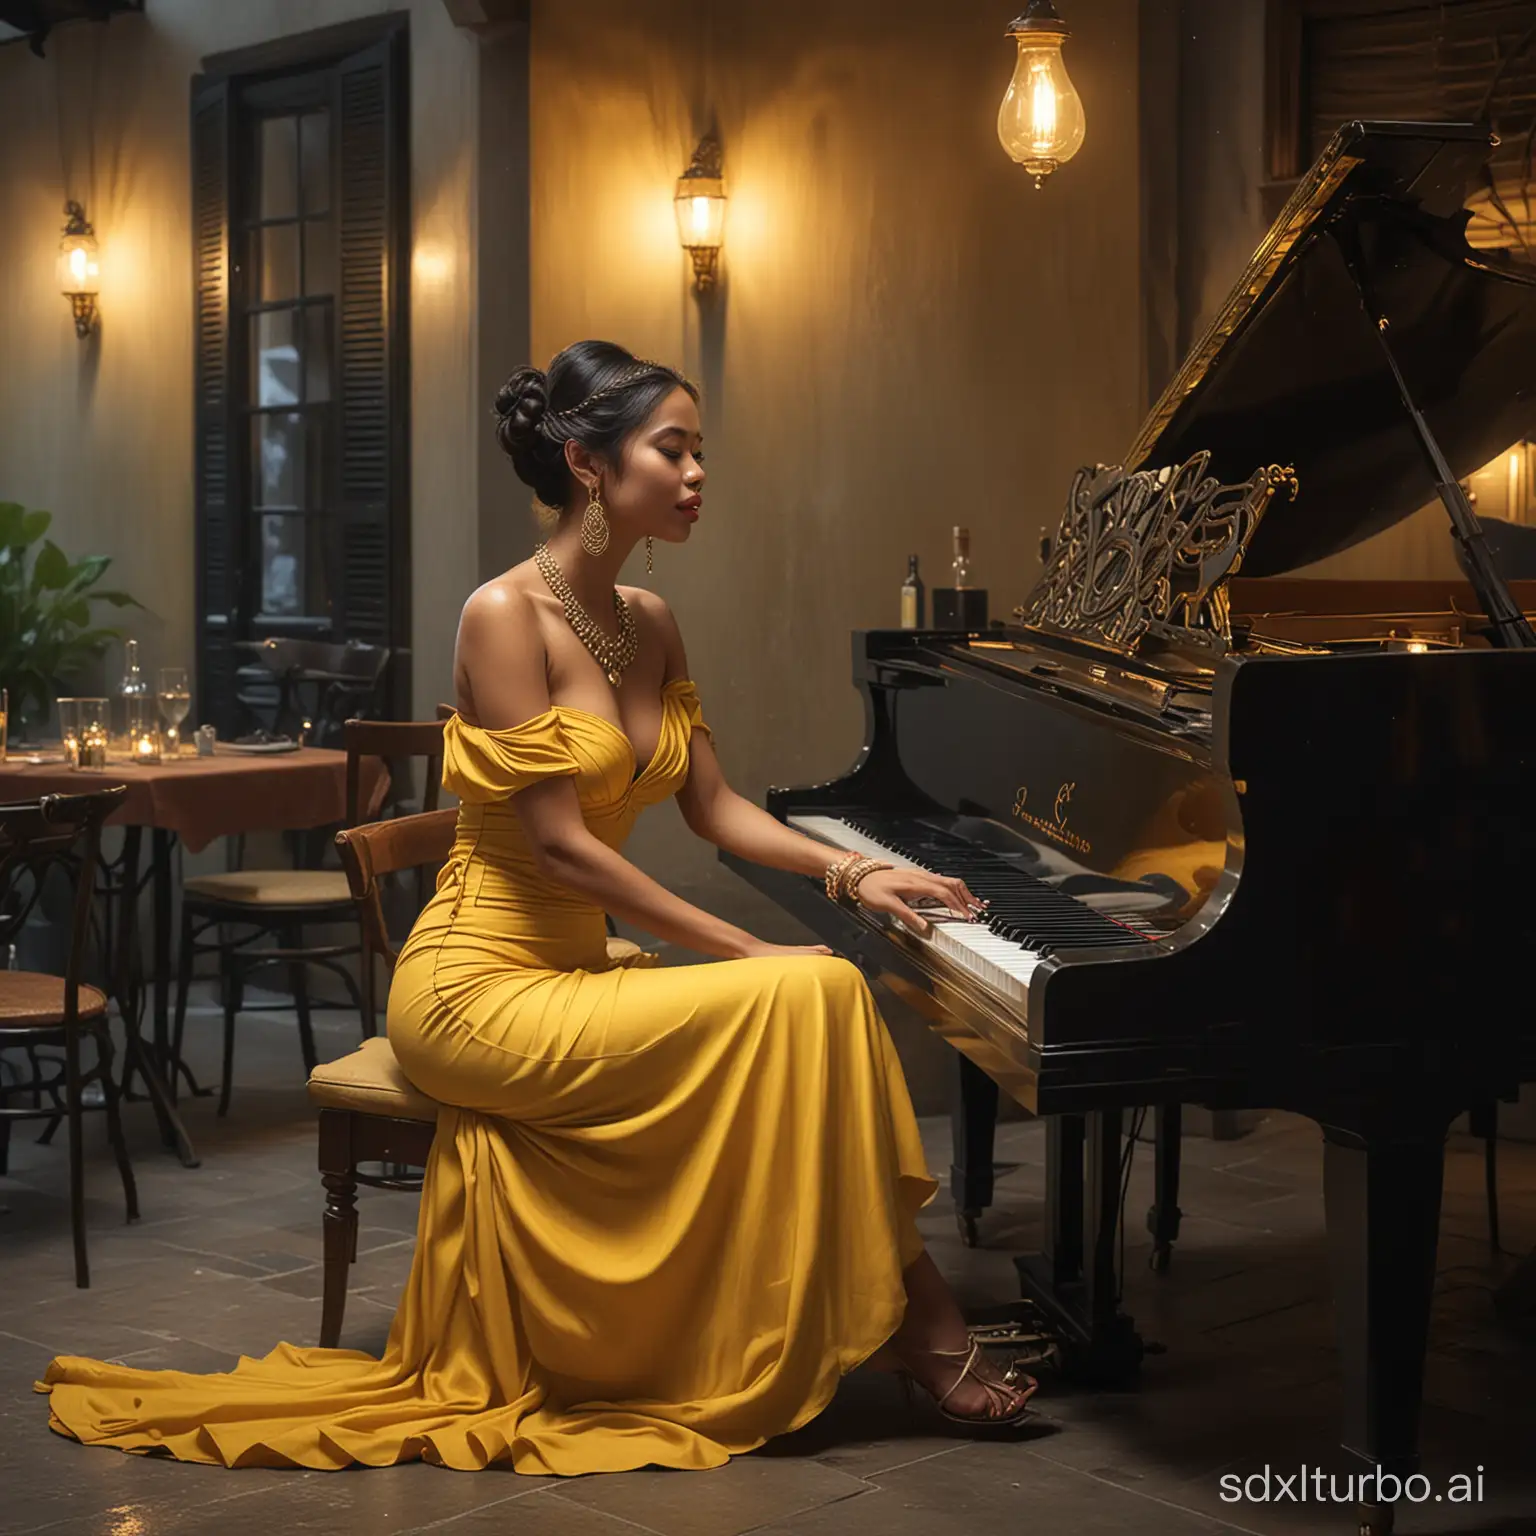 Imagine a 4K oil painting featuring an Indonesian woman in a flowing yellow dress, slim fat body, sitting and gracefully playing a jazz piano in a dimly lit room. Black hair was styled in an intricate braid, accentuated with dangling earrings and a sparkling necklace. With closed eyes and a soulful expression, he pours his heart into the music, captivating the audience with his talent and passion. dimly lit luxury outdoor cafe background.